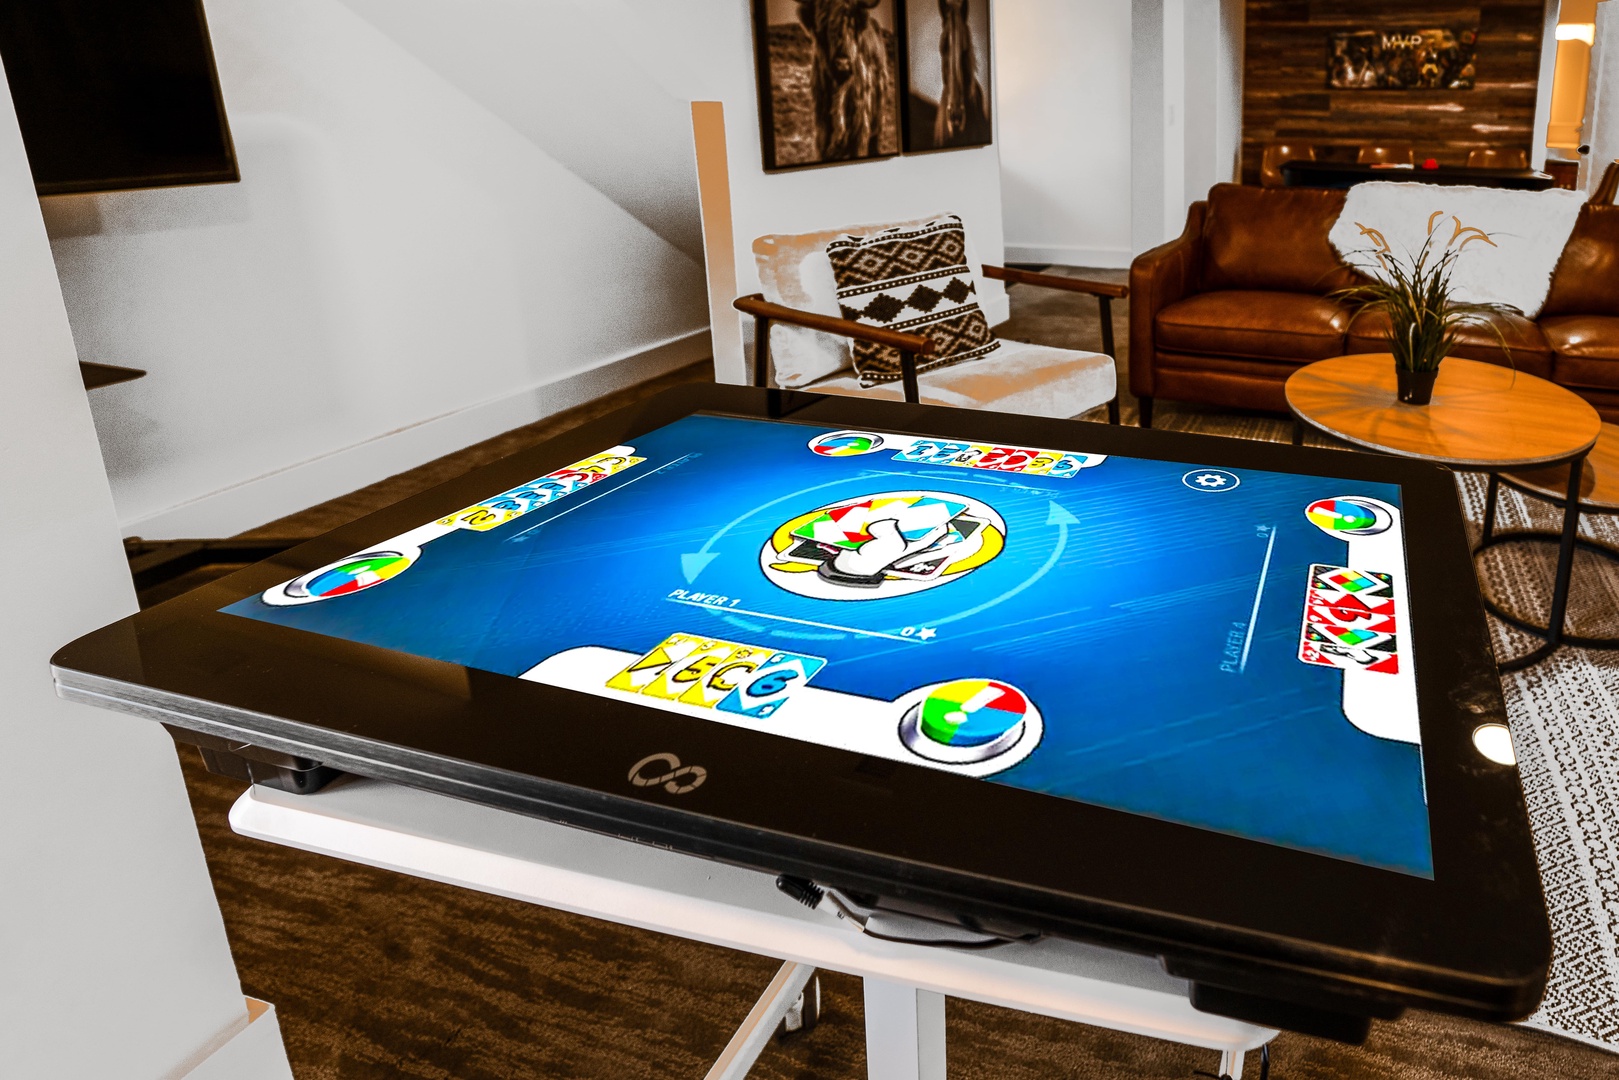 Enjoy the Infinity smart game table